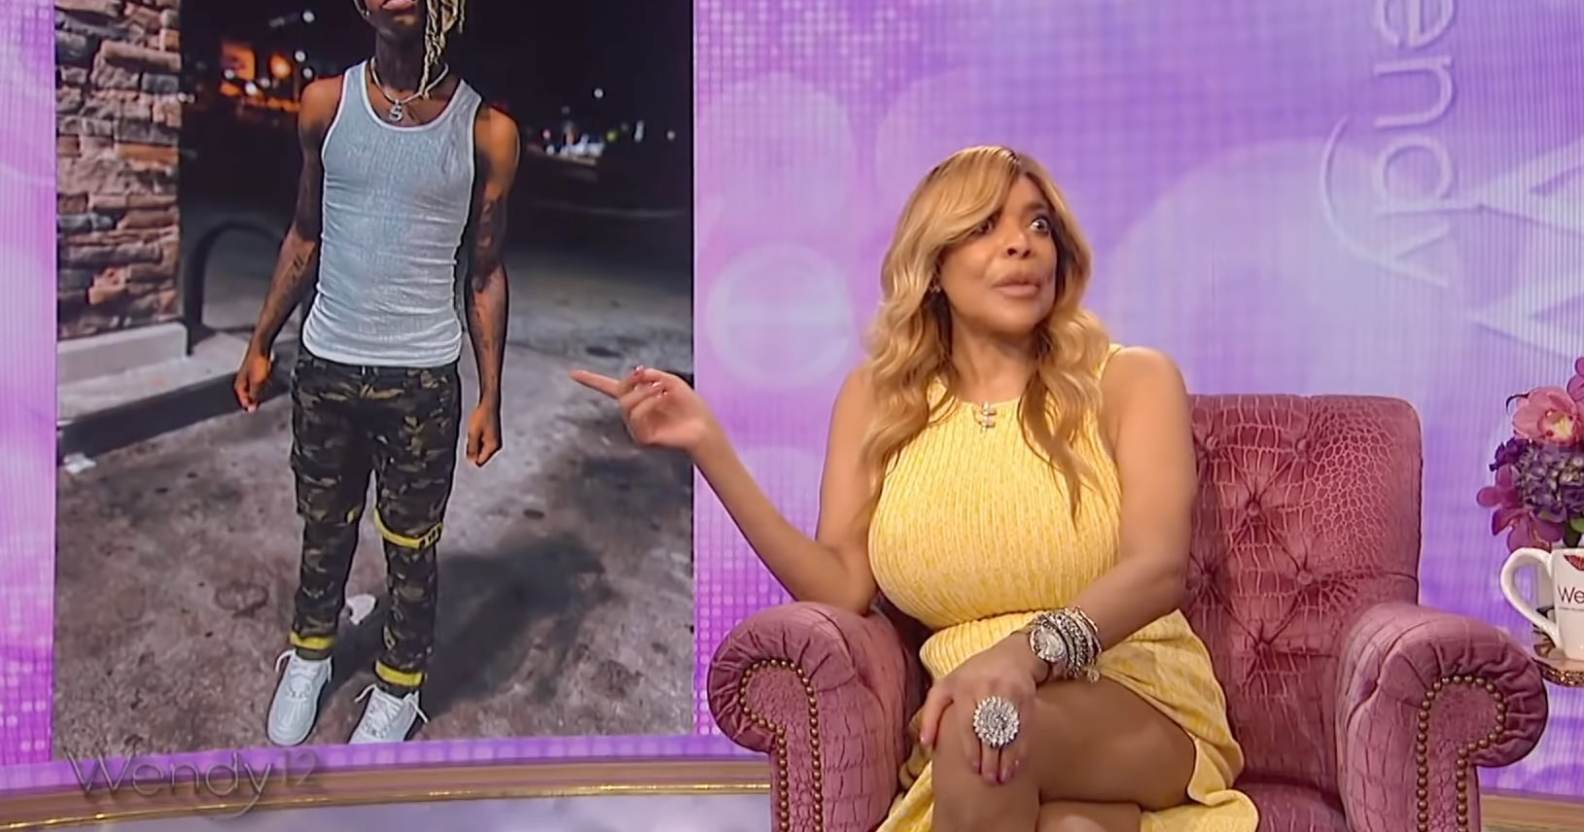 1584px x 832px - Wendy Williams faces blistering backlash over 'disgusting' coverage of  TikTok star's murder | PinkNews | Latest lesbian, gay, bi and trans news |  LGBTQ+ news